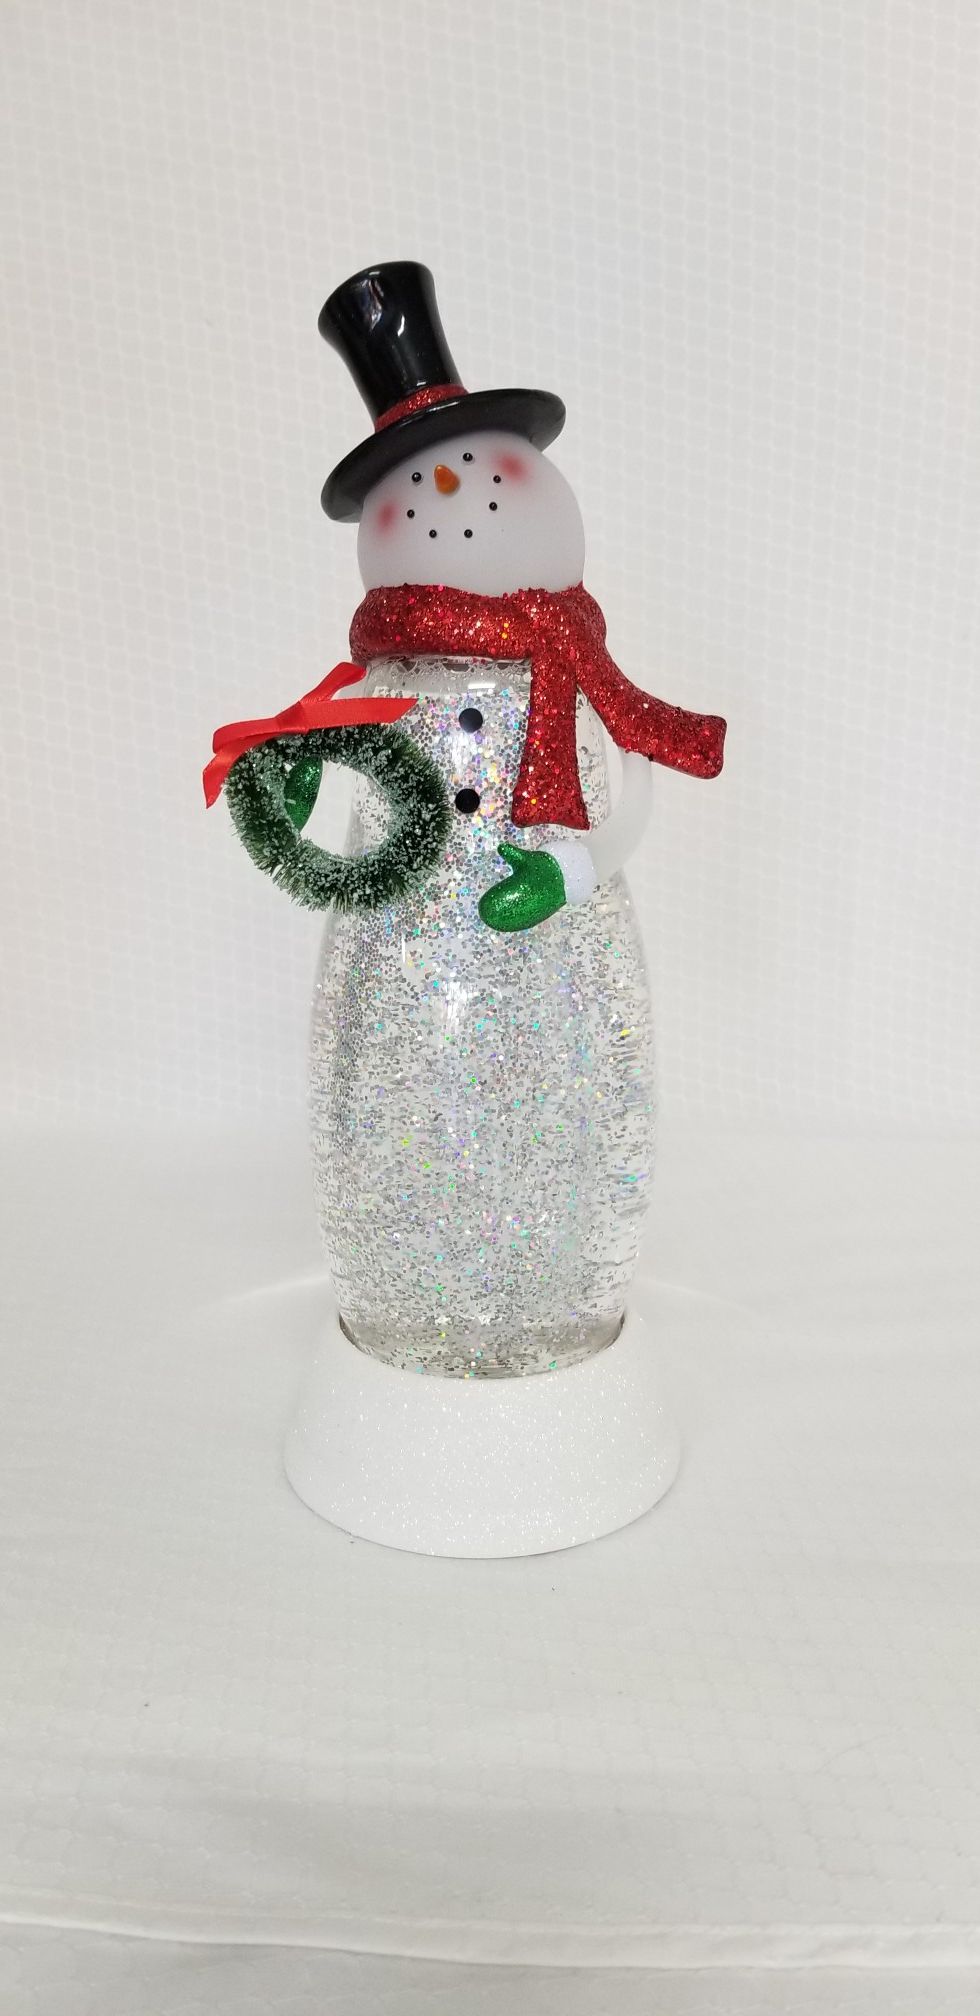 NEW - 12" Snowman LED Multicolored Light Up Tabletop Glitter-dome